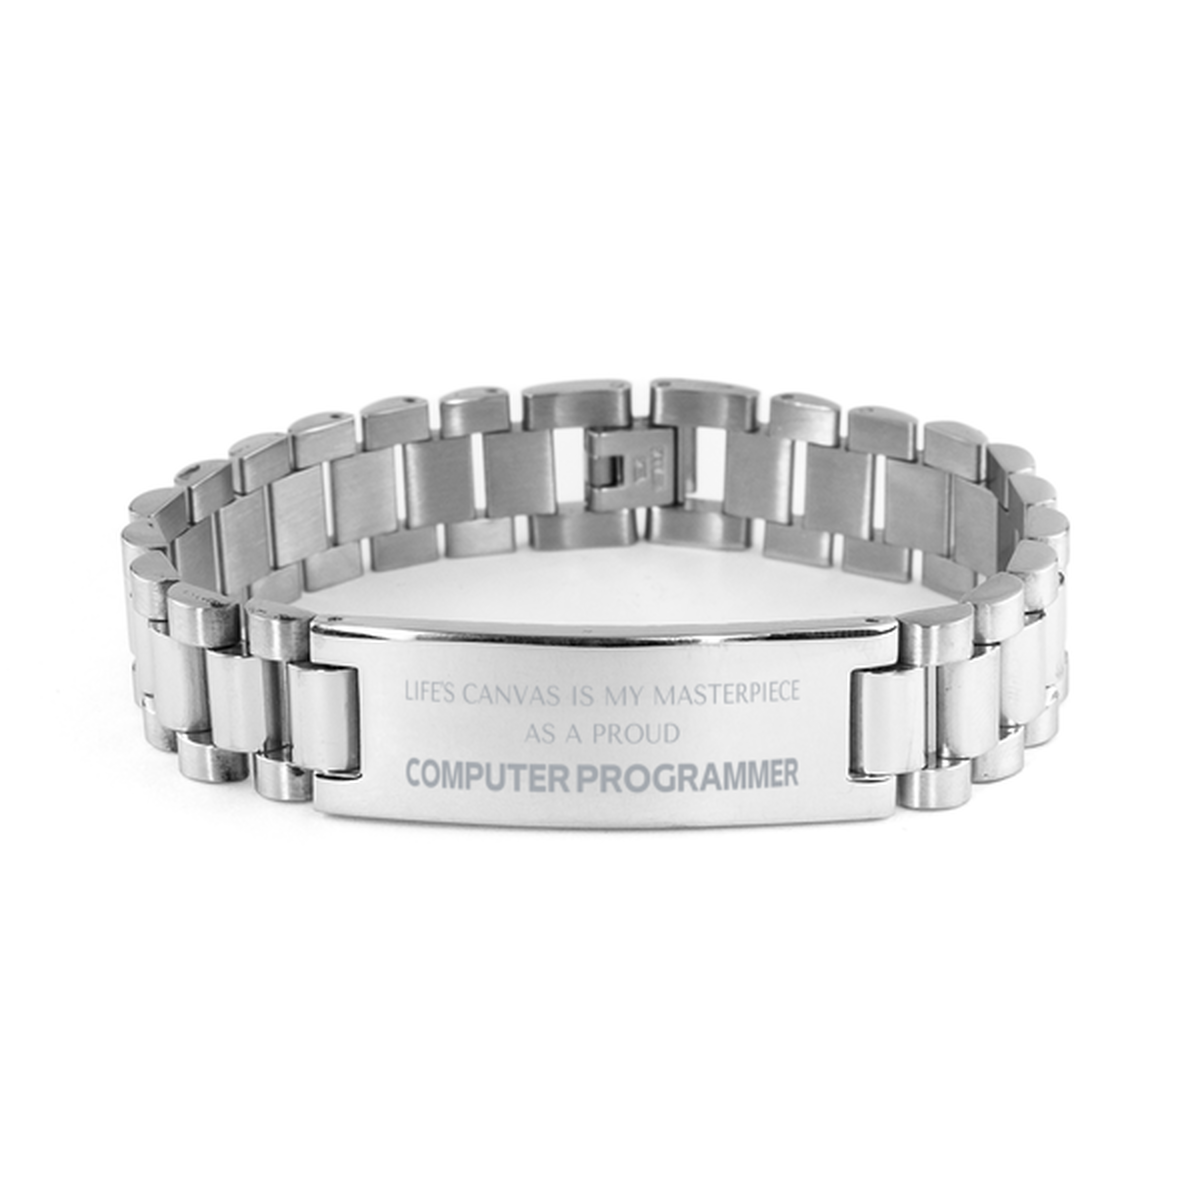 Proud Computer Programmer Gifts, Life's canvas is my masterpiece, Epic Birthday Christmas Unique Ladder Stainless Steel Bracelet For Computer Programmer, Coworkers, Men, Women, Friends